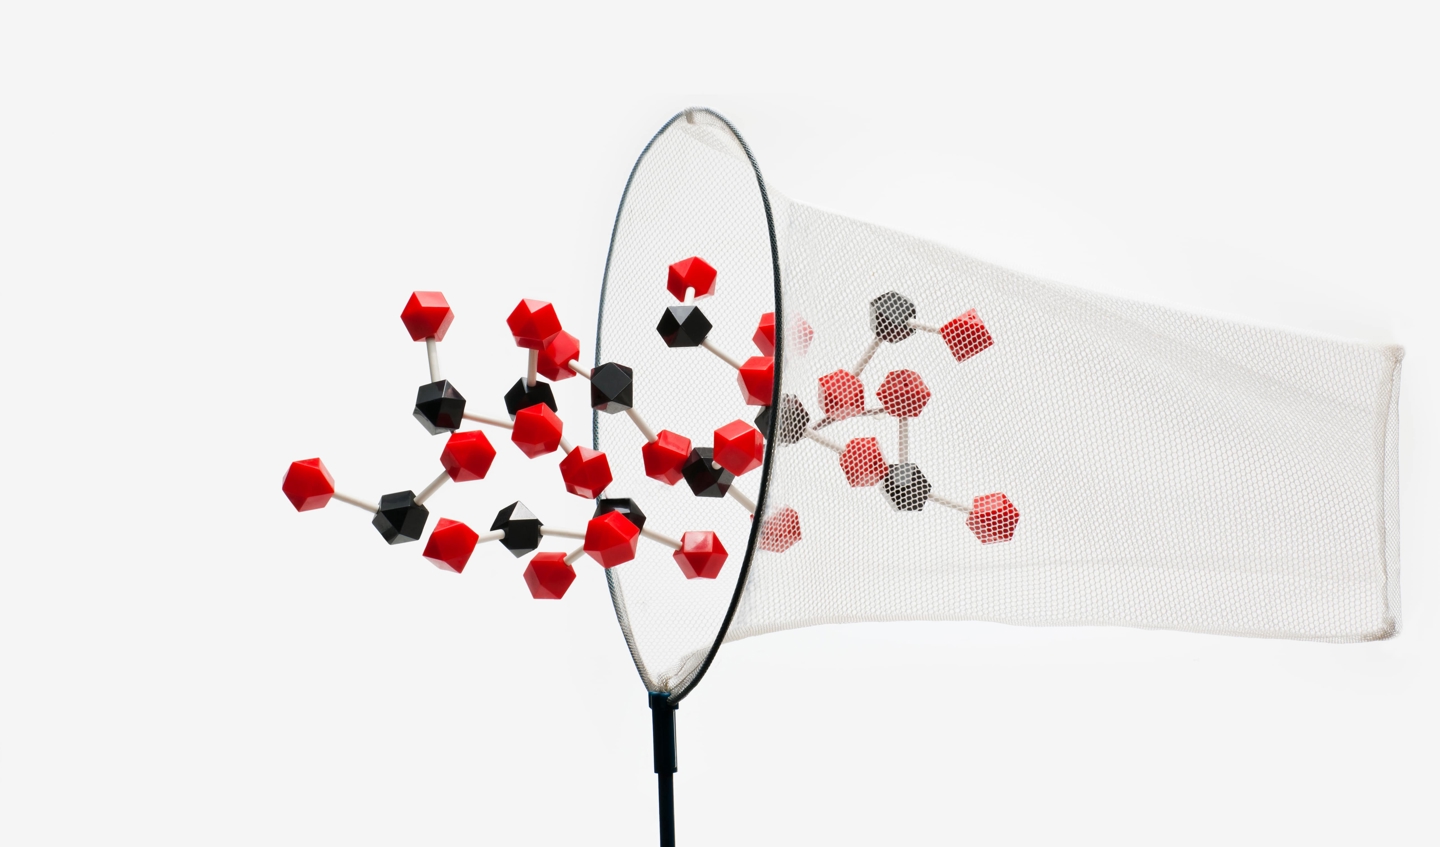 Carbon molecules being caught in a net graphic. 